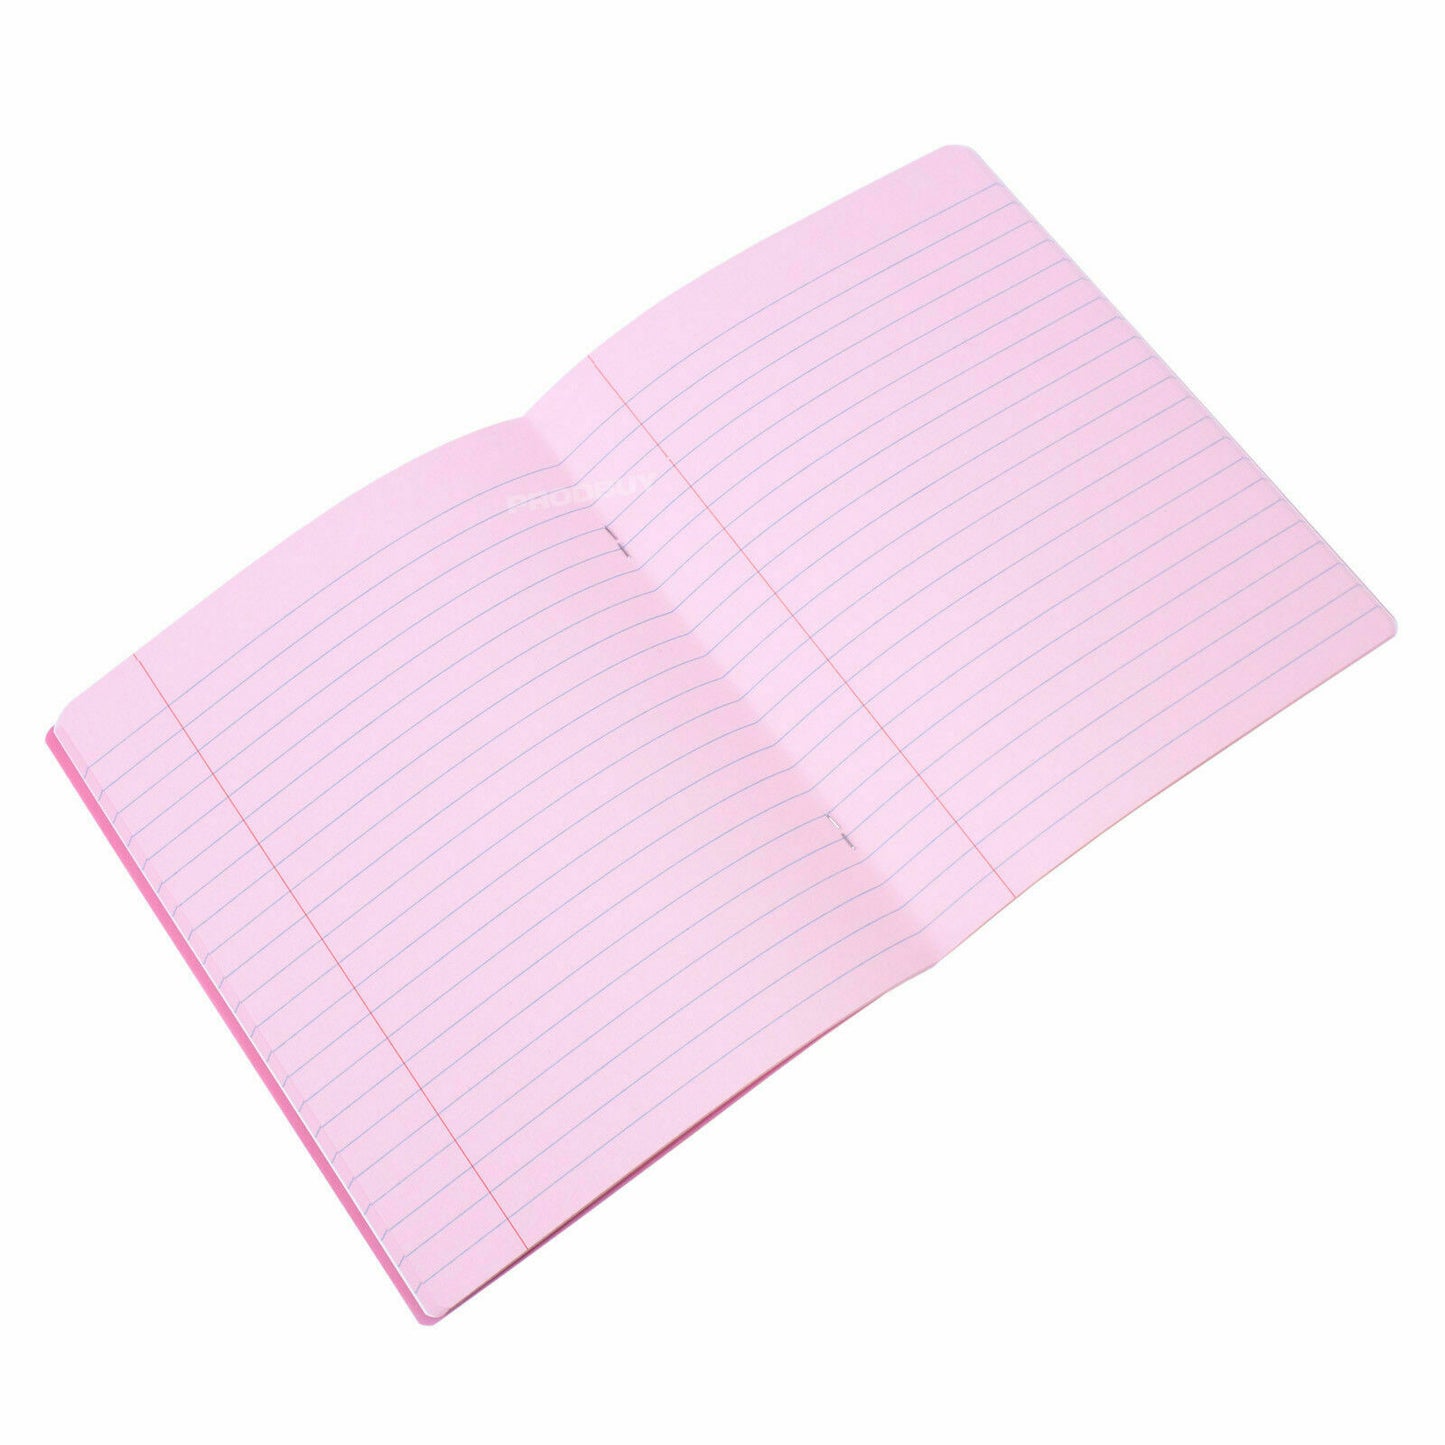 Pack of 3 Memory Aid A5 Pink Paper 88 Page Notebooks